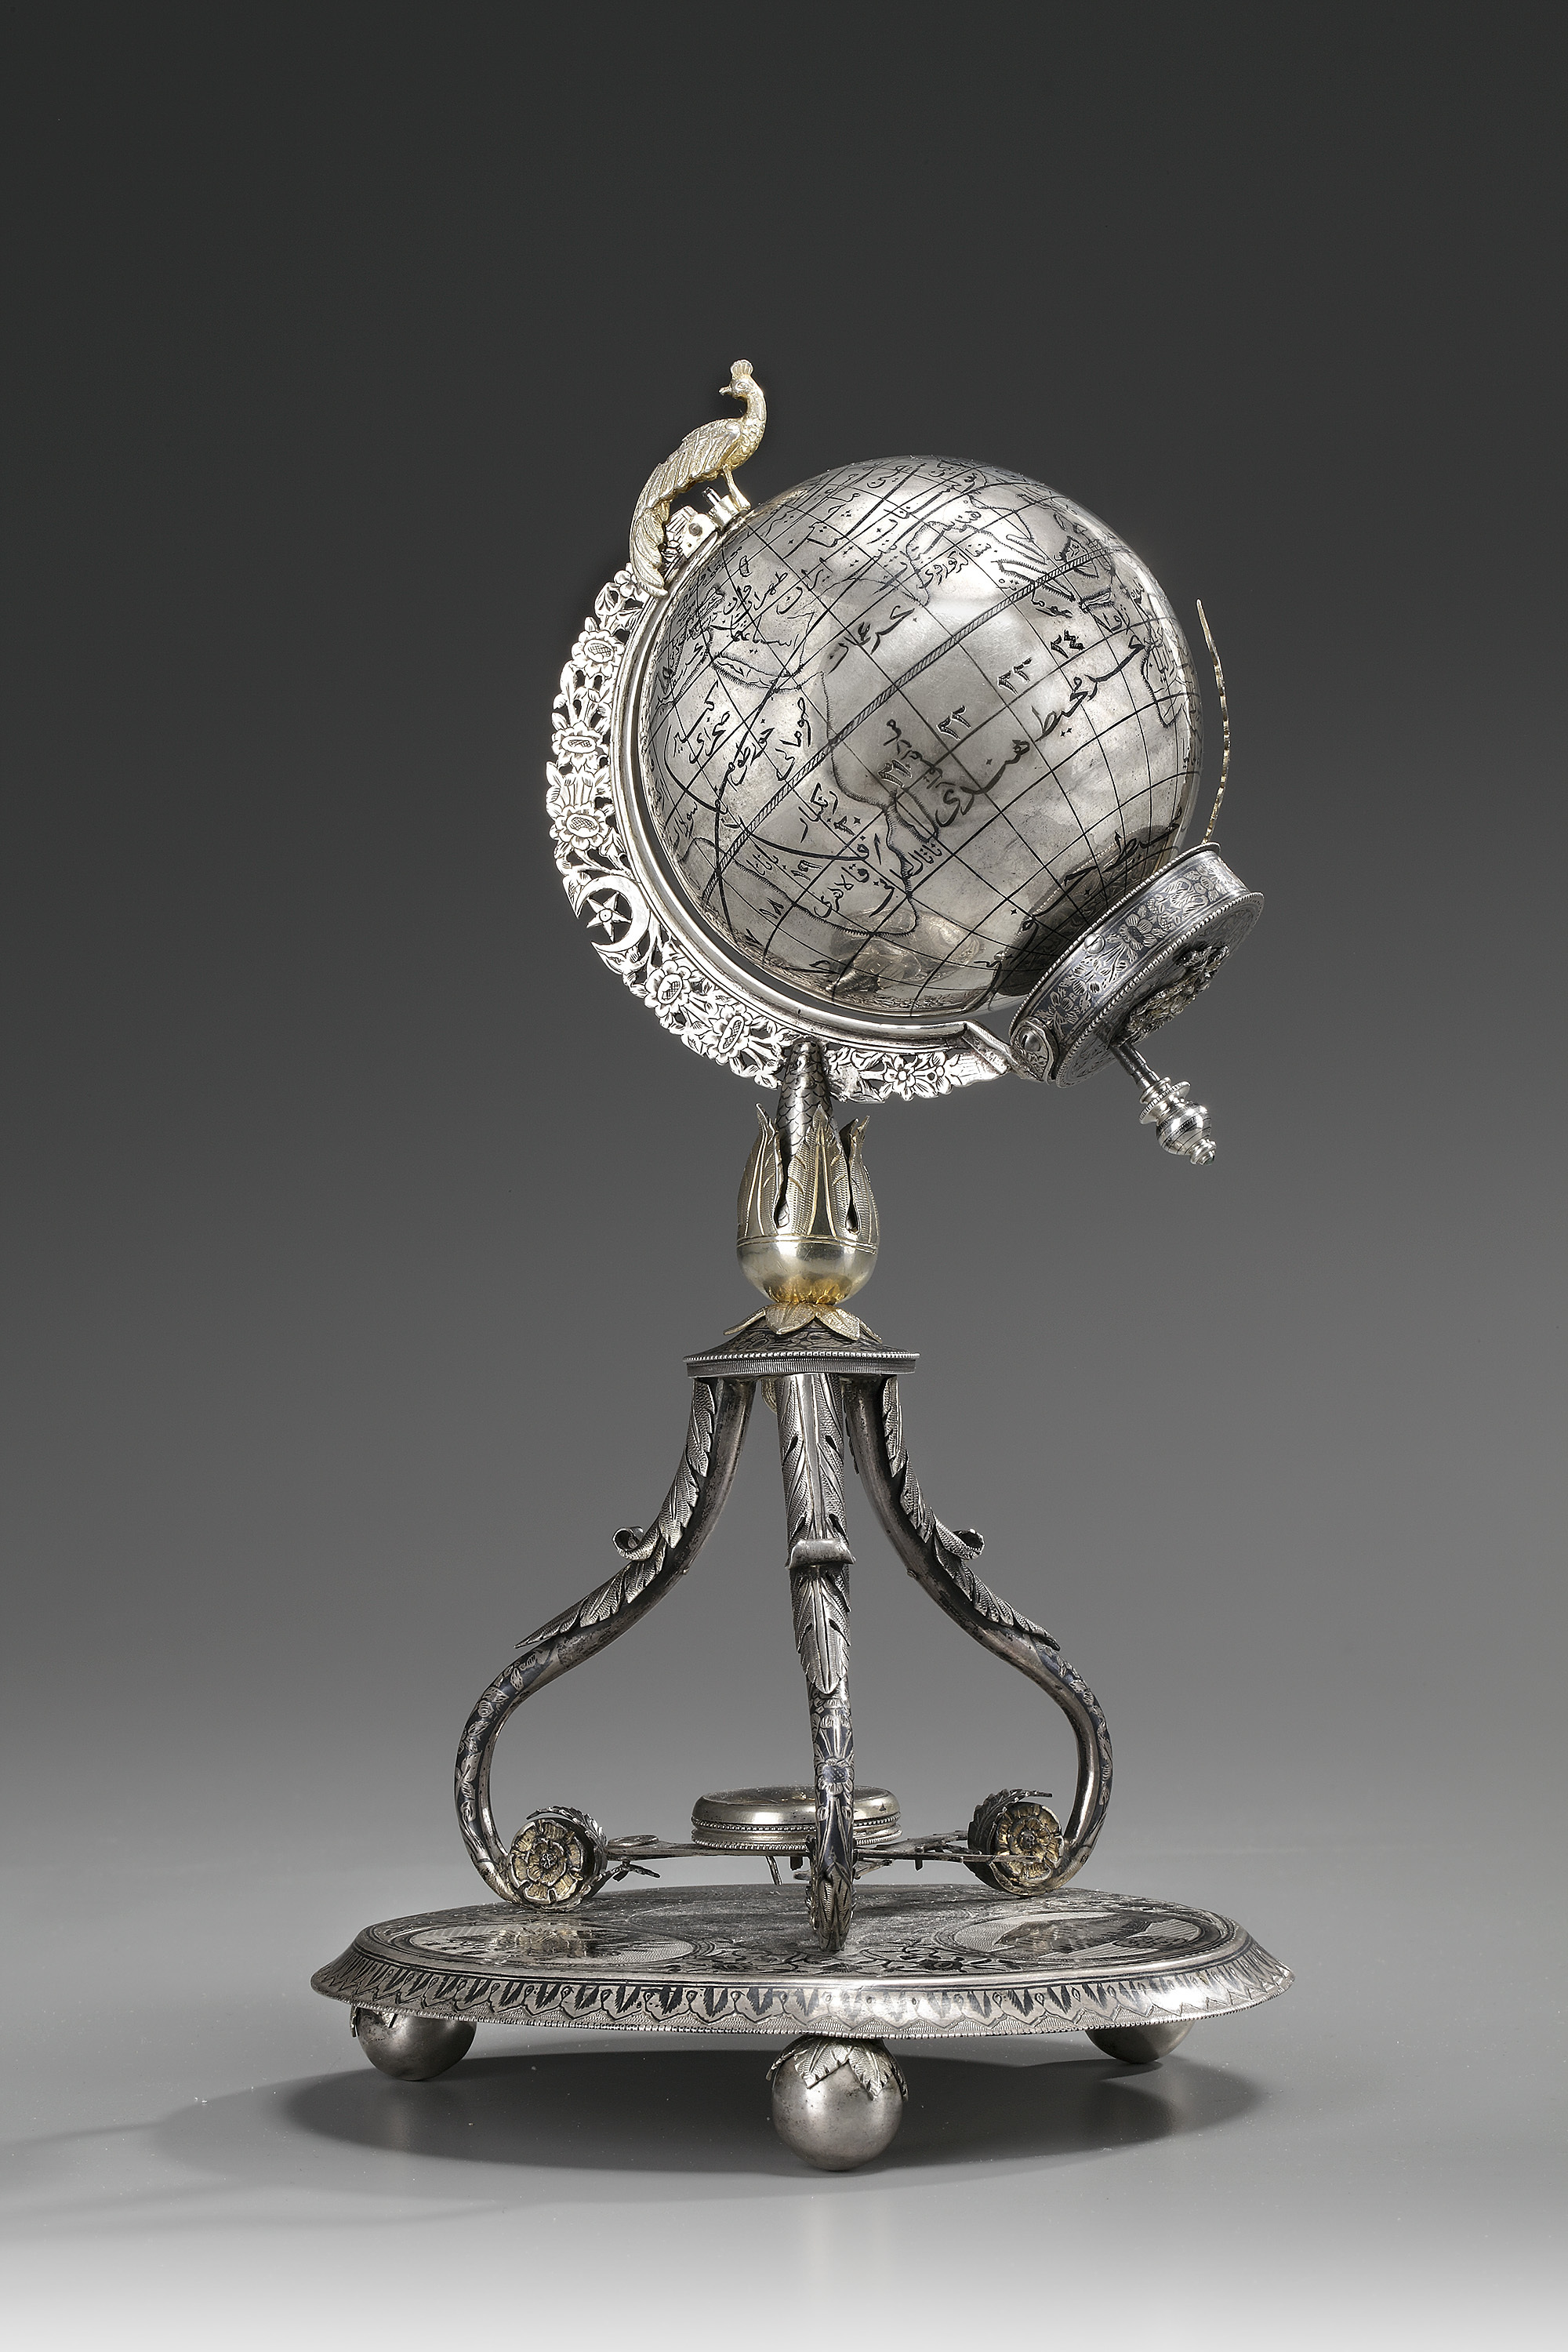 AN OTTOMAN SILVER, NIELLOED AND ENGRAVED GLOBE CLOCK BEARING THE TUGHRA OF SULTAN ABDULHAMID II TURK - Image 5 of 18